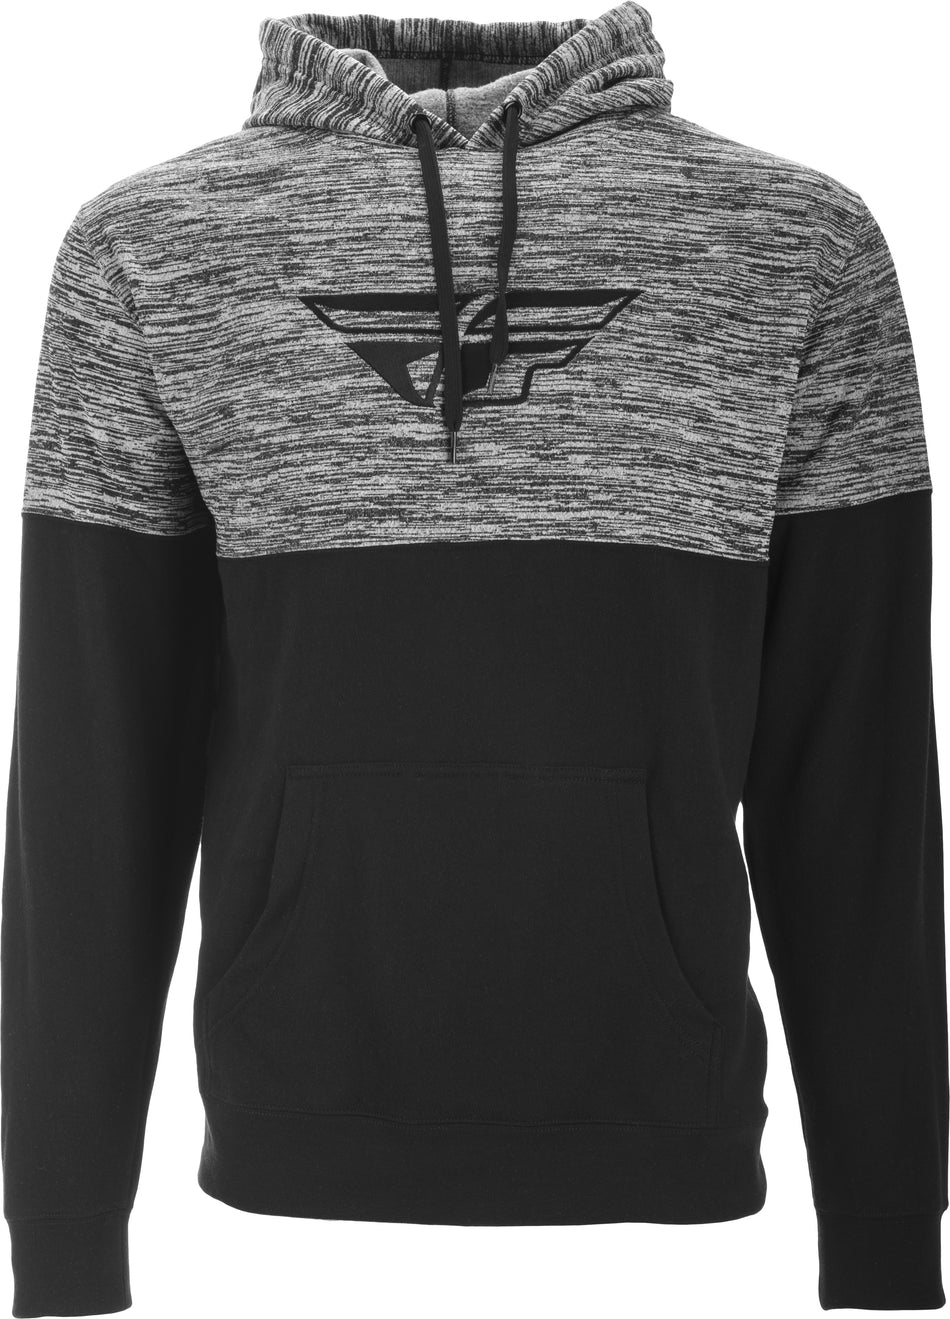 FLY RACING Fly F-Wing Pullover Hoodie Black Noise Md 354-0228M